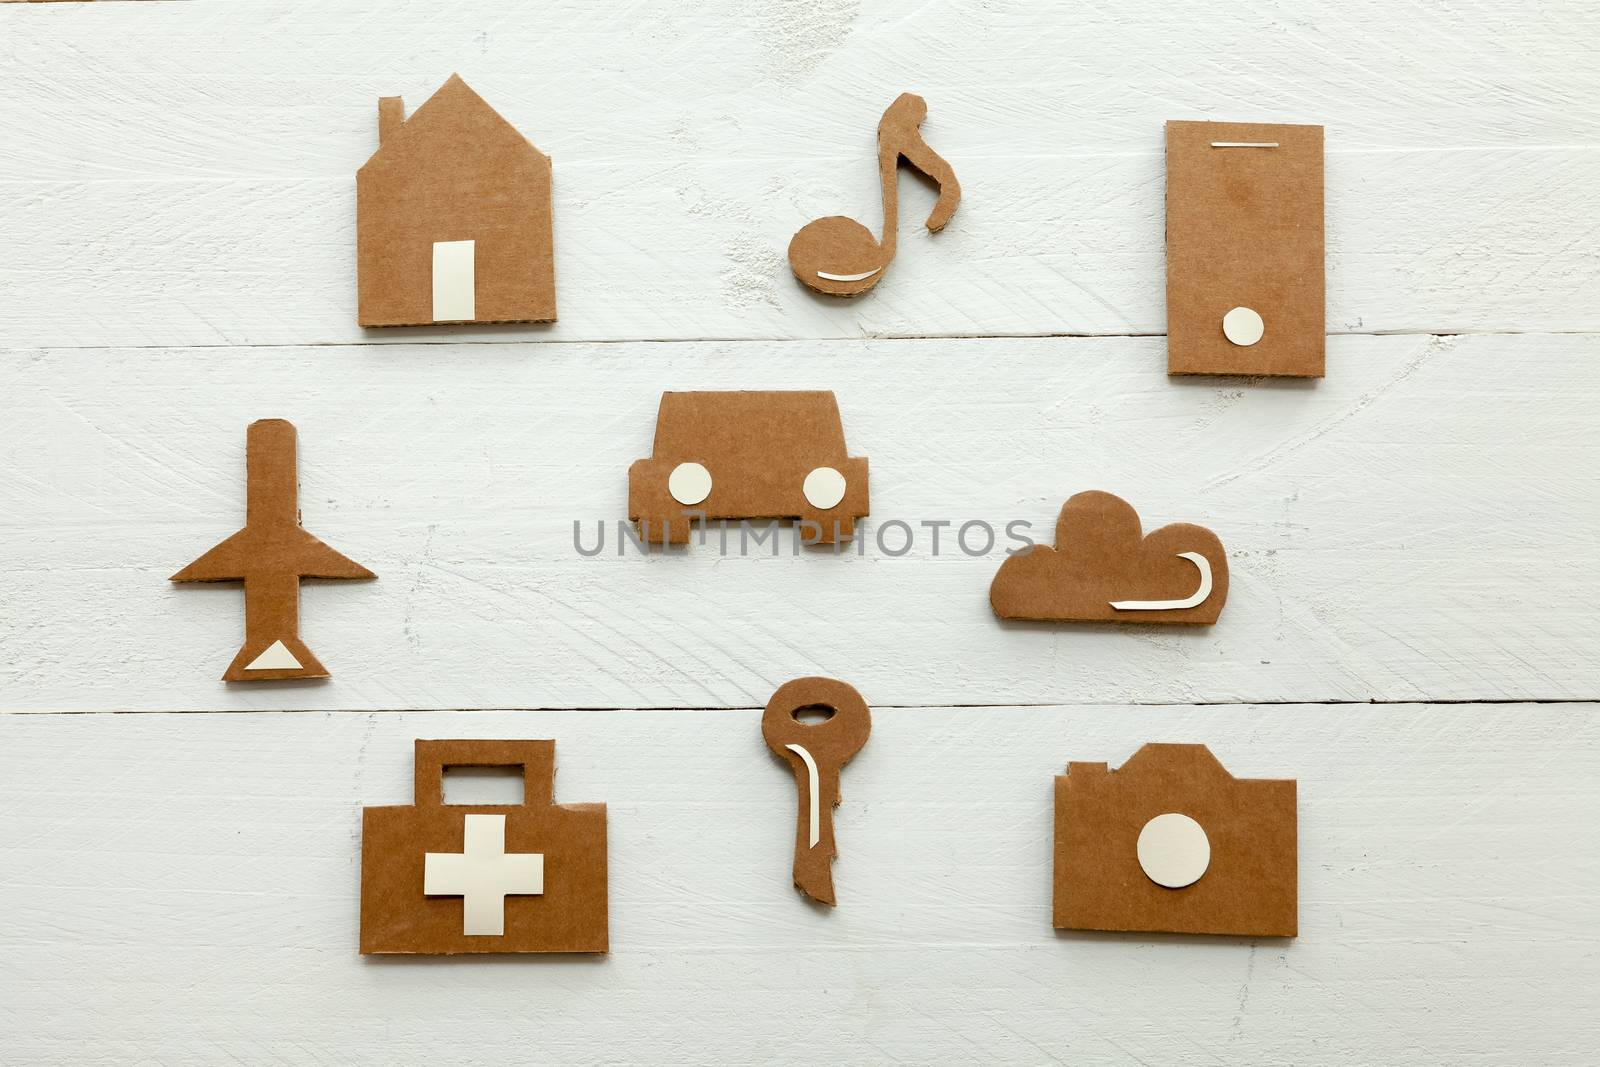 Set of web icons or graphical illustrations cut from cardboard and placed on white wooden background